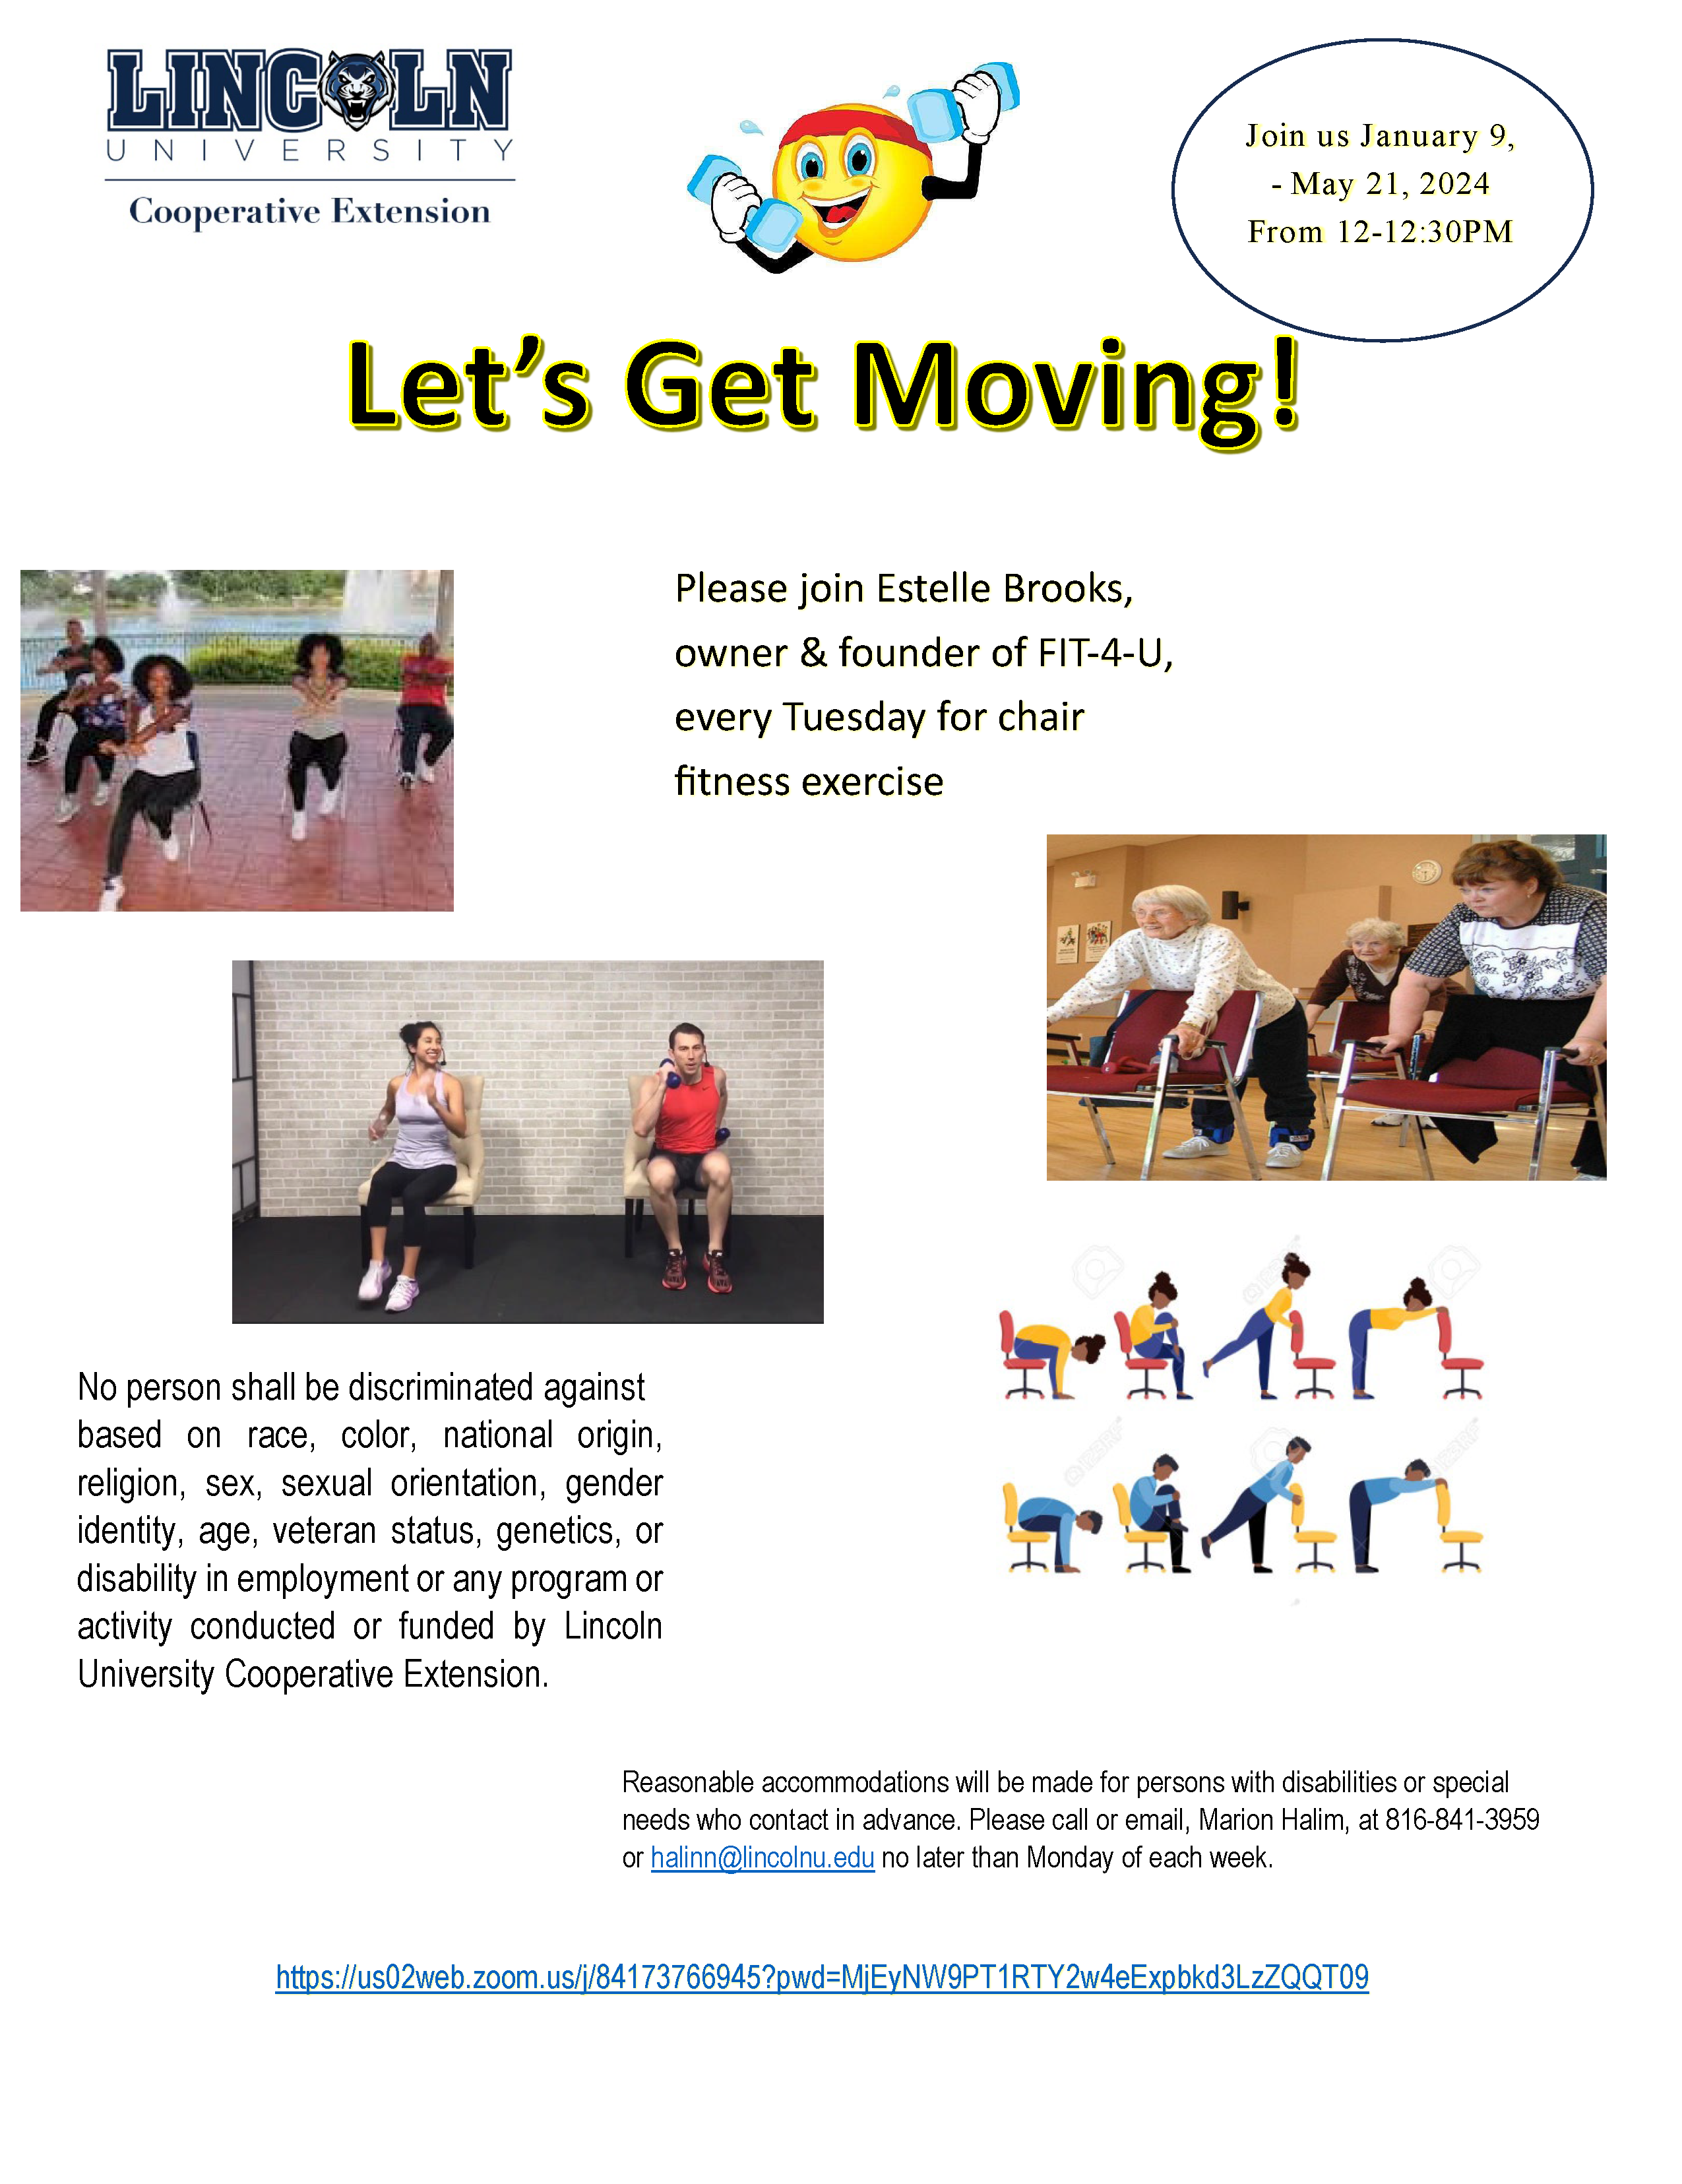 chair-exercise-let-get-moving-flyer-2024.png